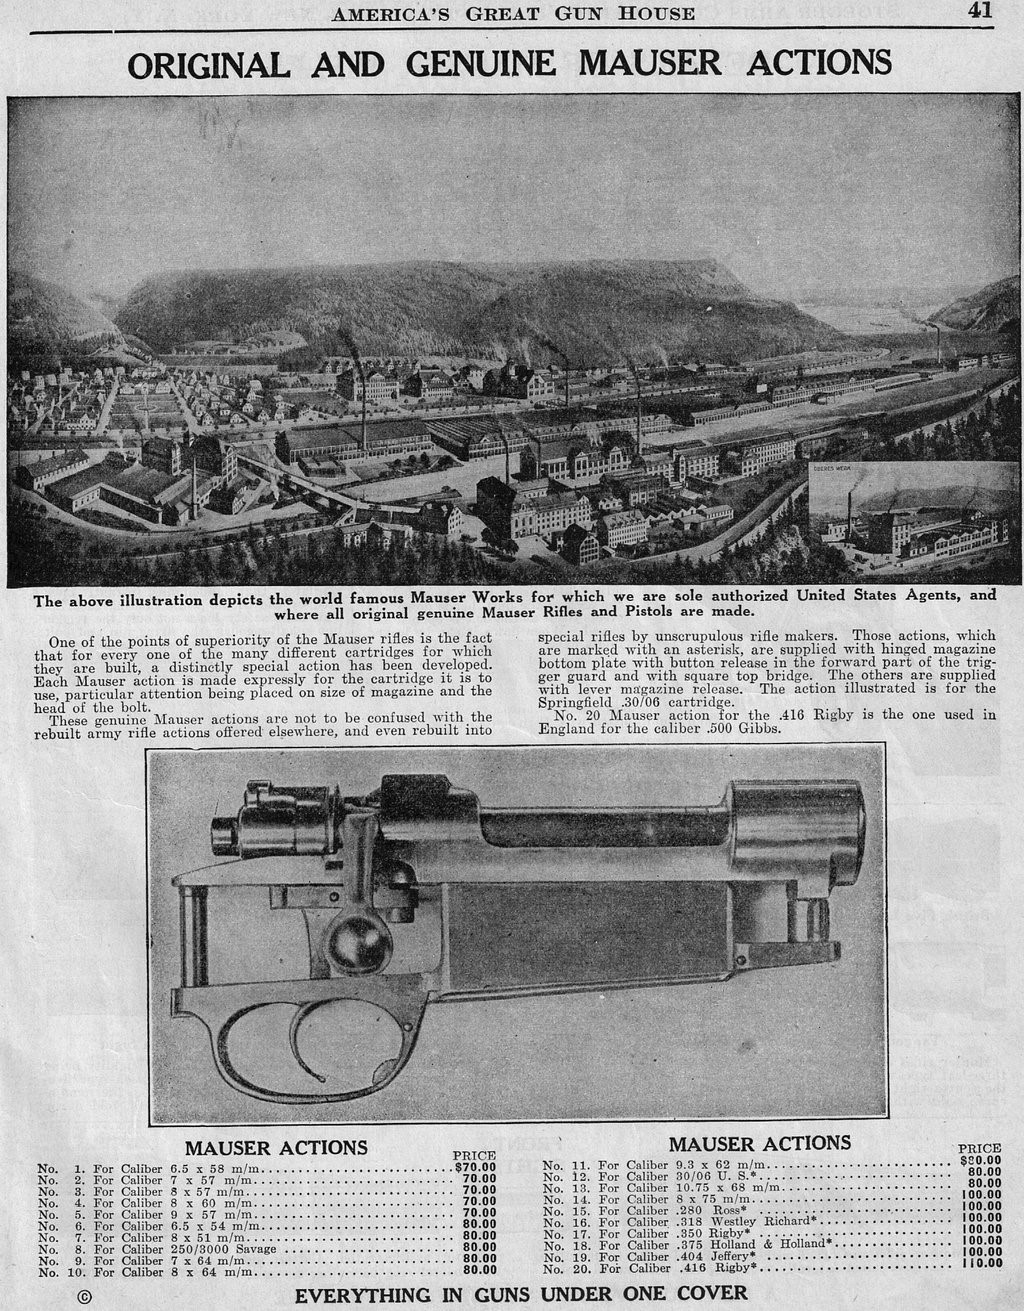 Mauser Stoeger 1939 Page 41.jpg